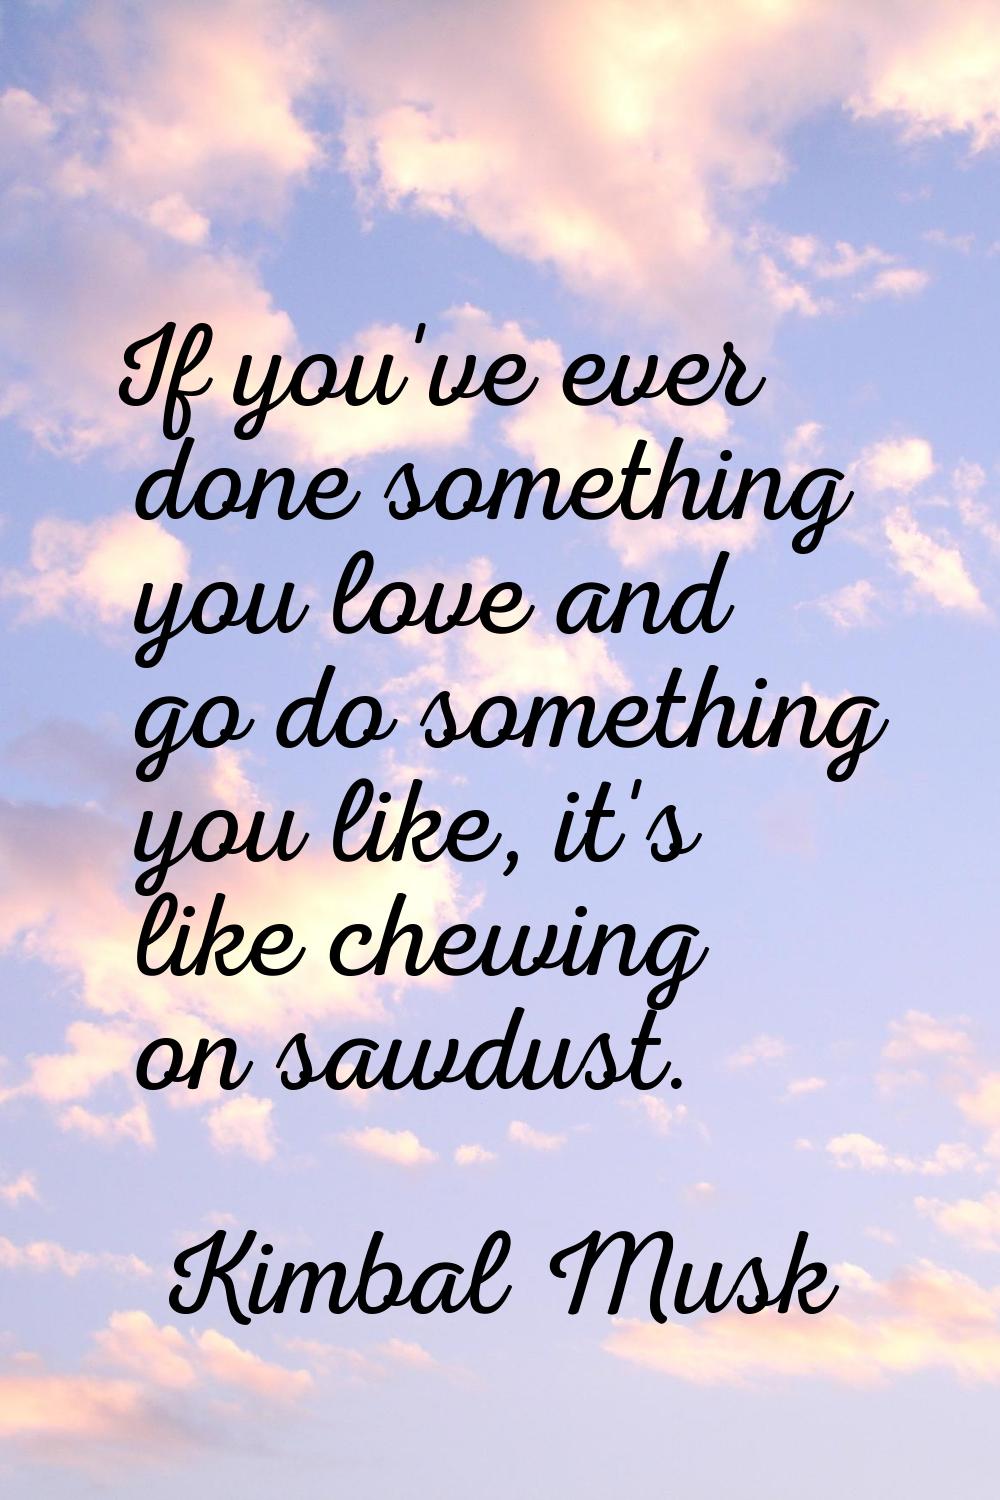 If you've ever done something you love and go do something you like, it's like chewing on sawdust.